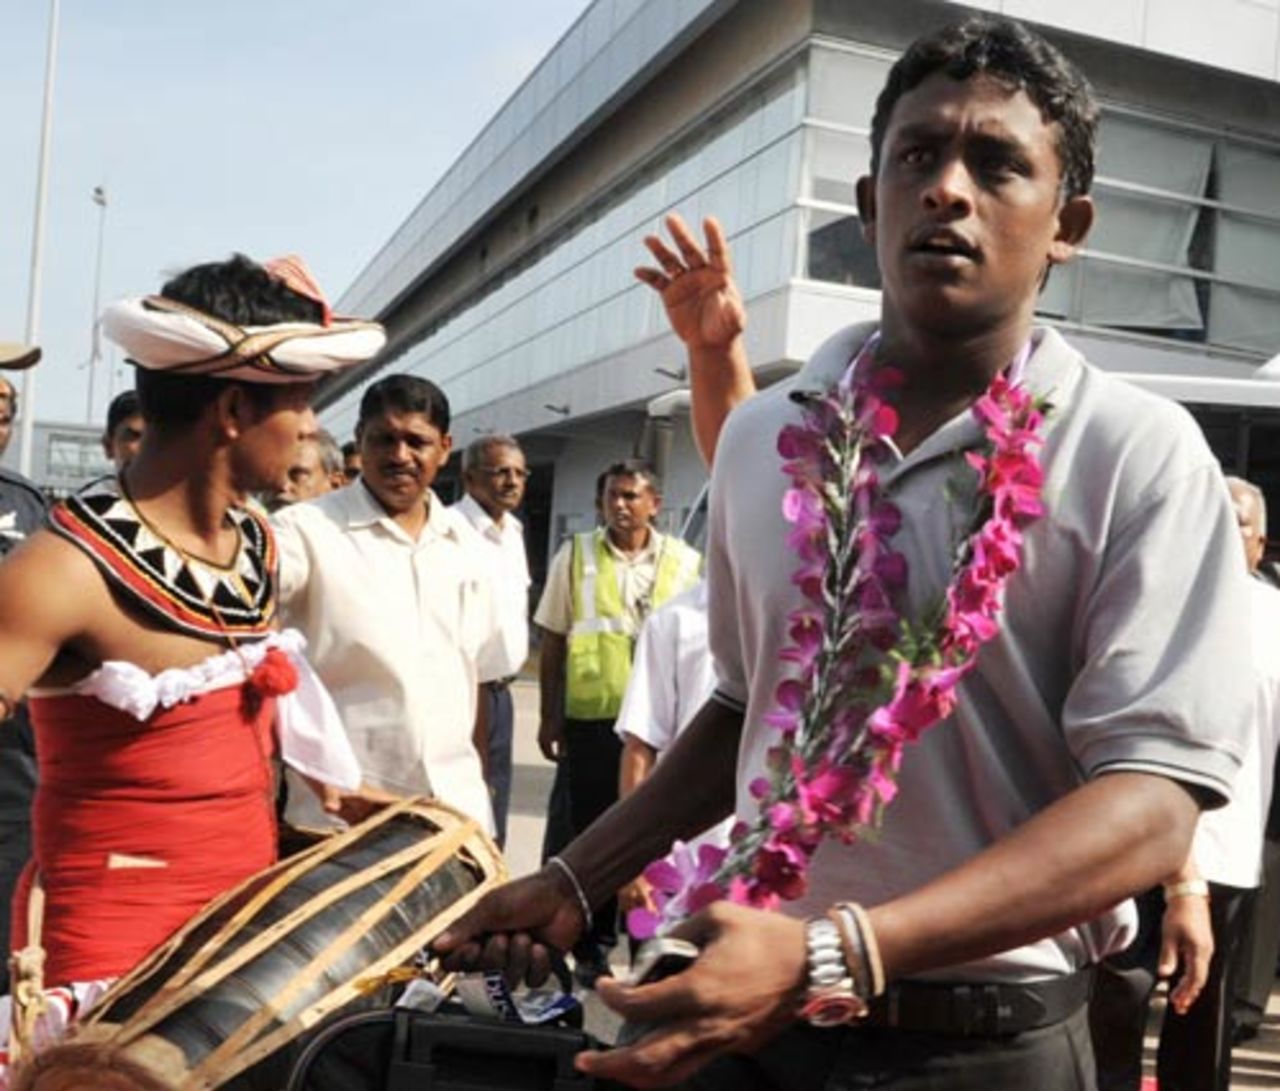 Ajantha Mendis arrives at Colombo airport after a successful Asia Cup campaign, Colombo, July 9, 2008